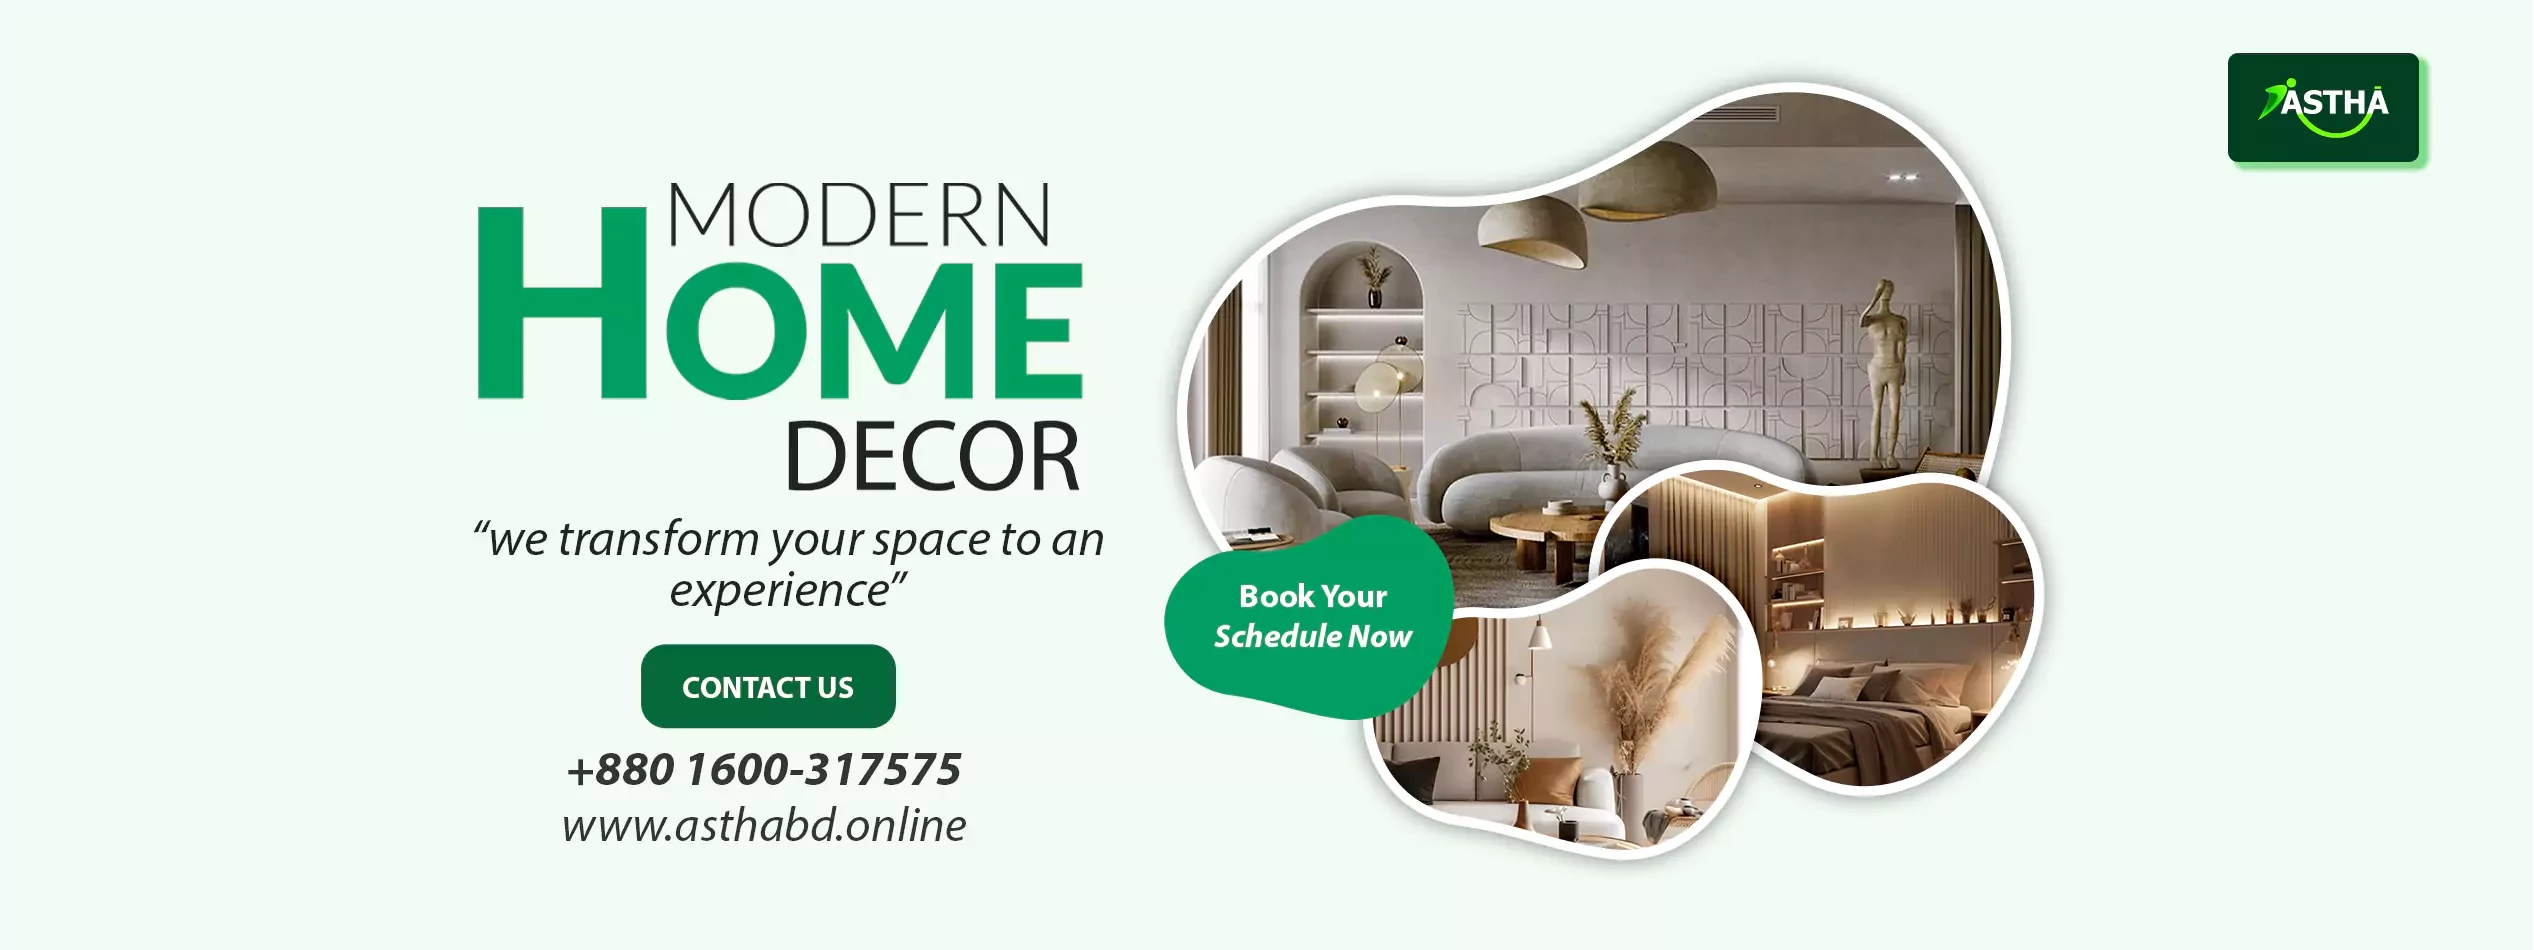 ASTHA - Home Decor Service | we transform your space to an experience.